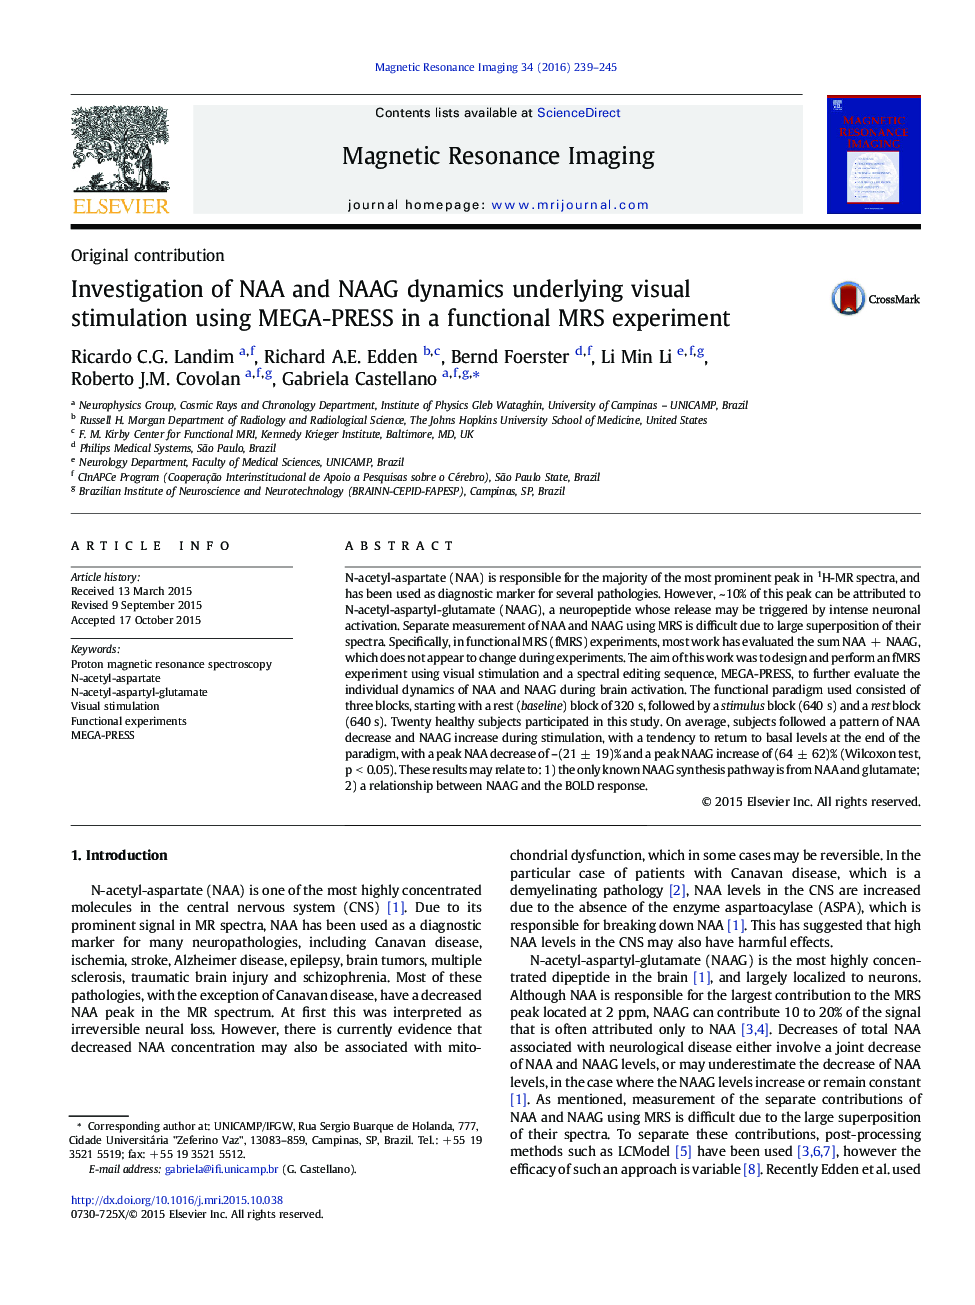 Investigation of NAA and NAAG dynamics underlying visual stimulation using MEGA-PRESS in a functional MRS experiment